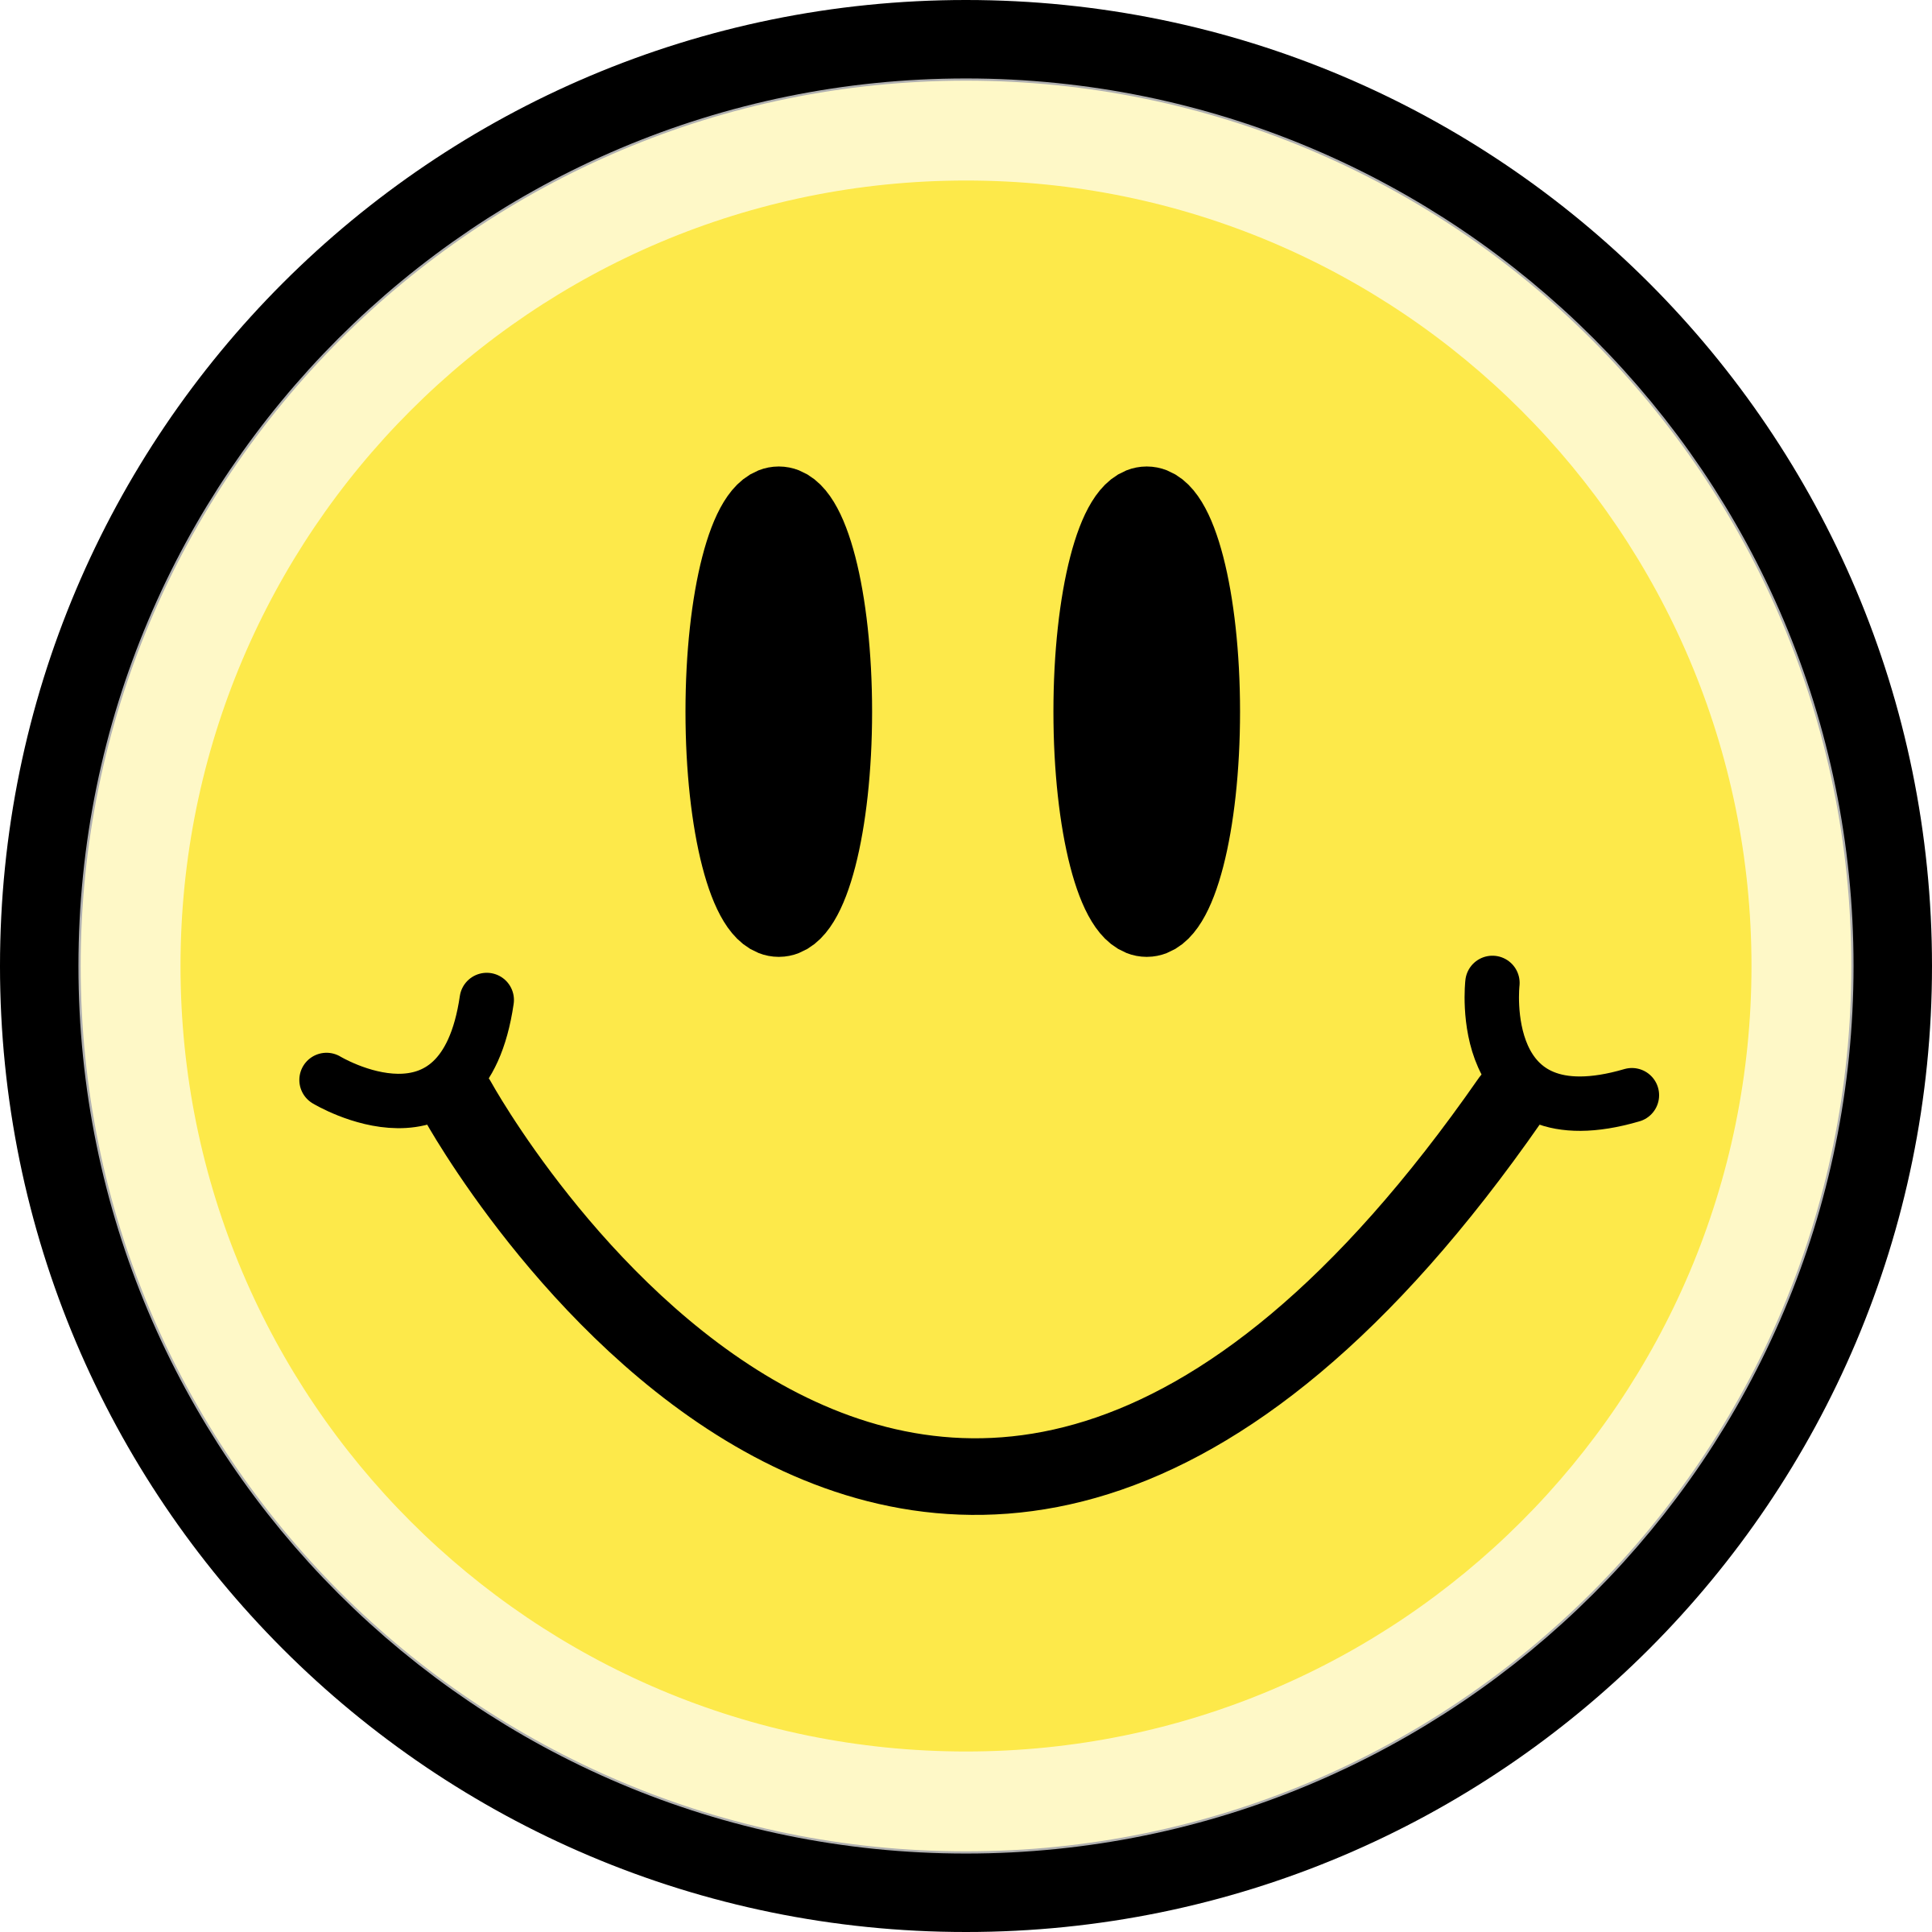 Smiley Emoticon Clip Art Smiley Png Png Download 24002400 Free